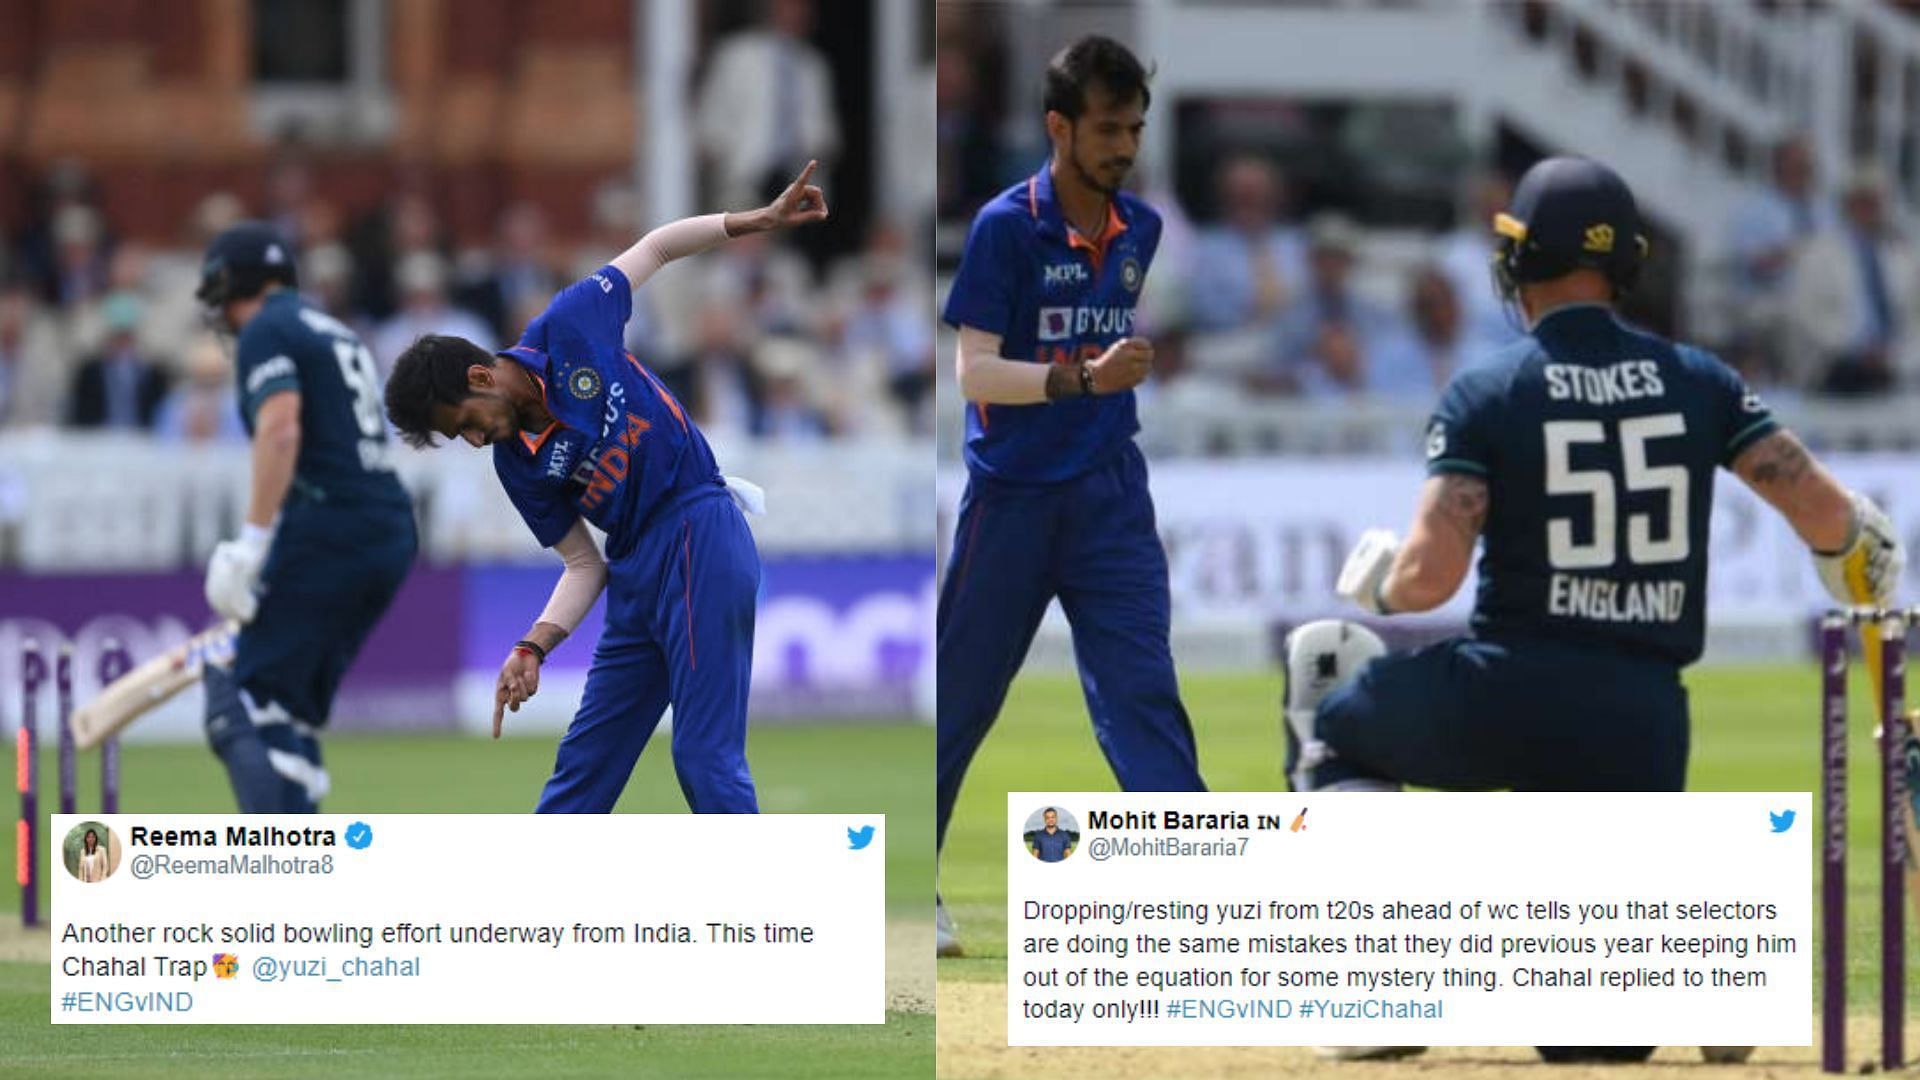 Yuzvendra Chahal celebrates wickets of Bairstow and Stokes. (P.C.:Twitter)